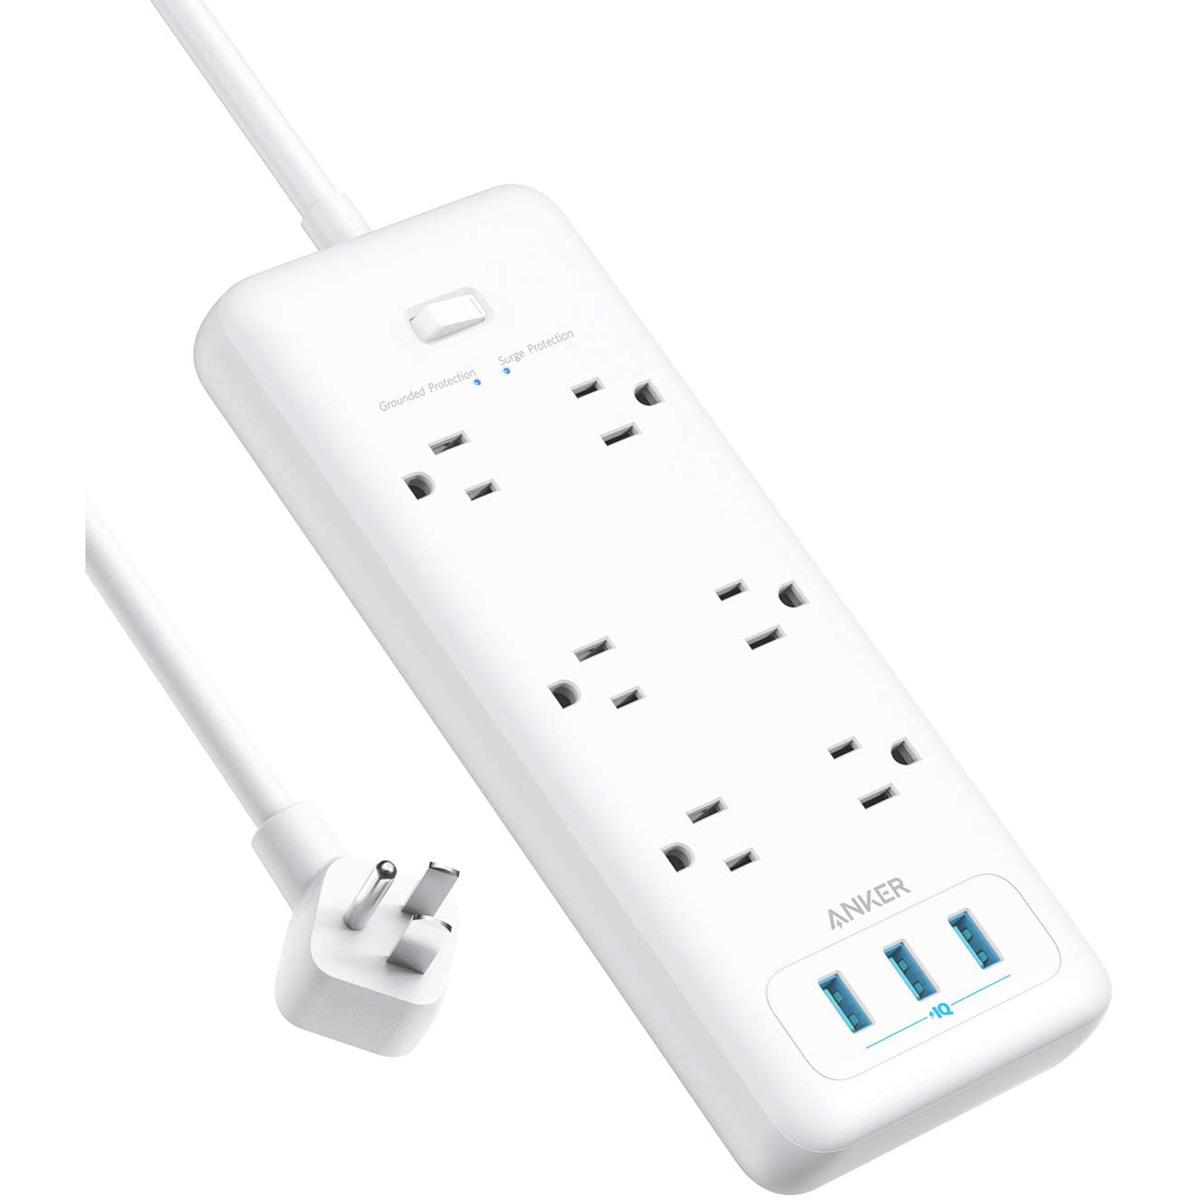 Anker Power Strip with 6 Outlets and 3 USB Ports for $19.99 Shipped